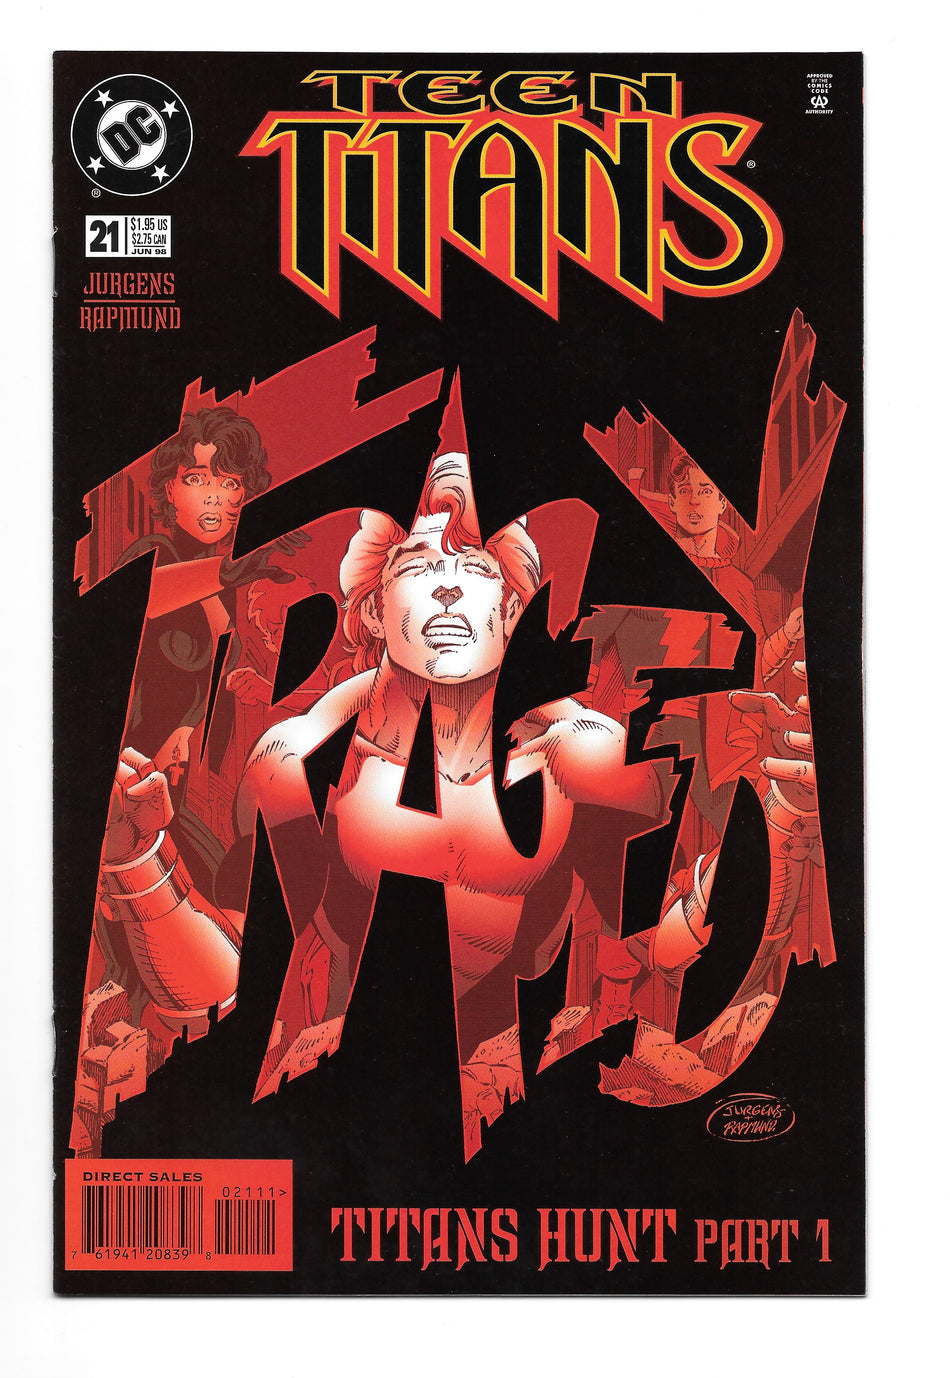 Photo of Teen Titans, Vol. 2 (1998)  Iss 21   Comic sold by Stronghold Collectibles